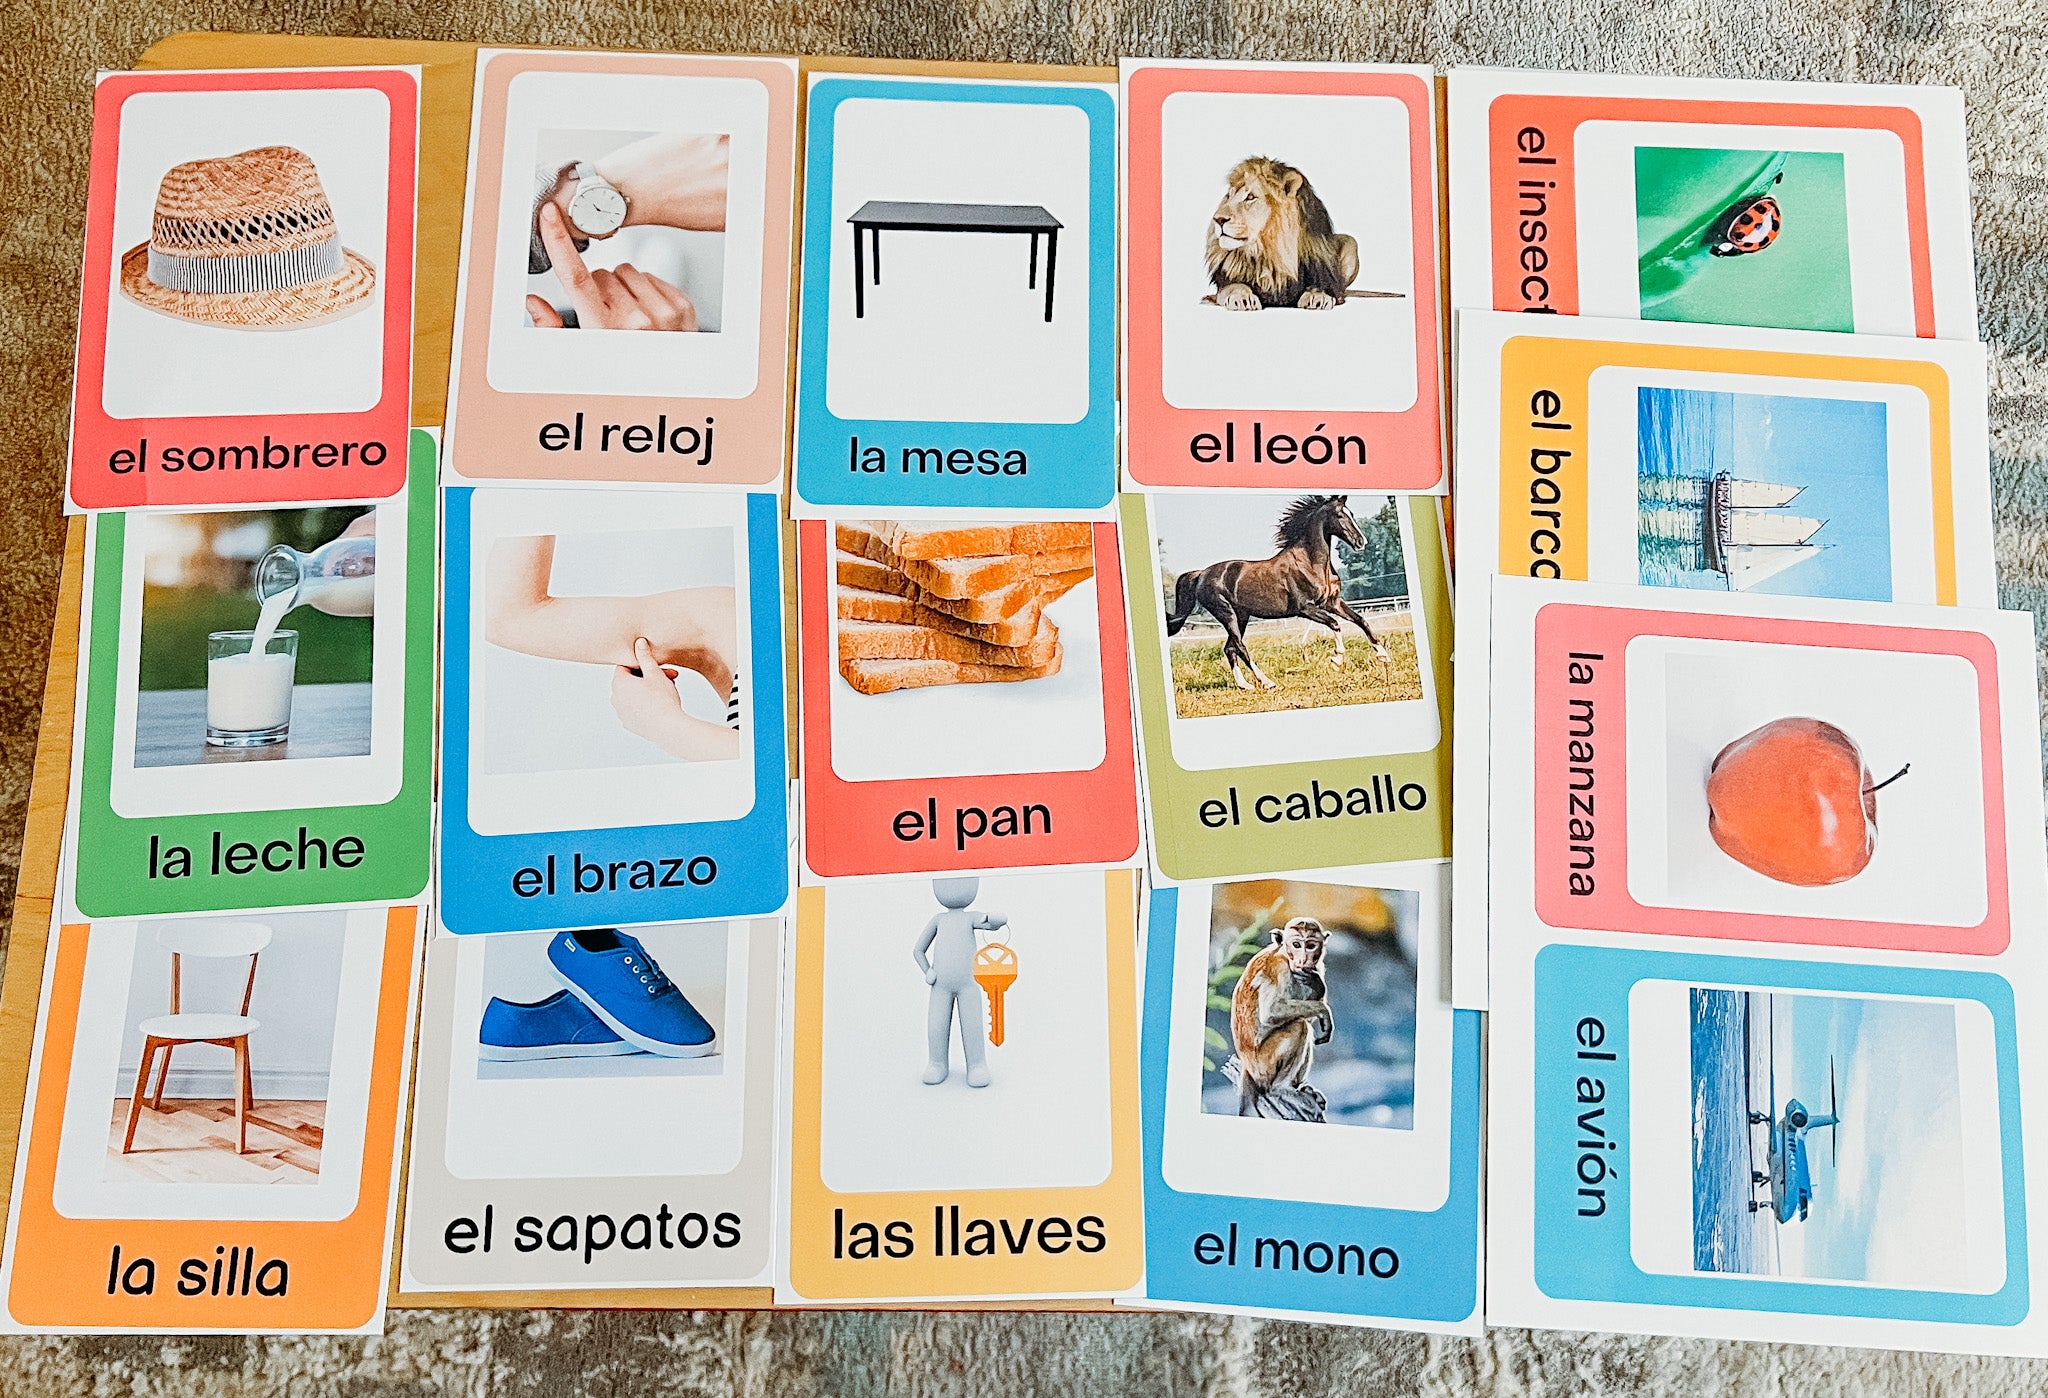 50 Spanish Words (downloadable file)